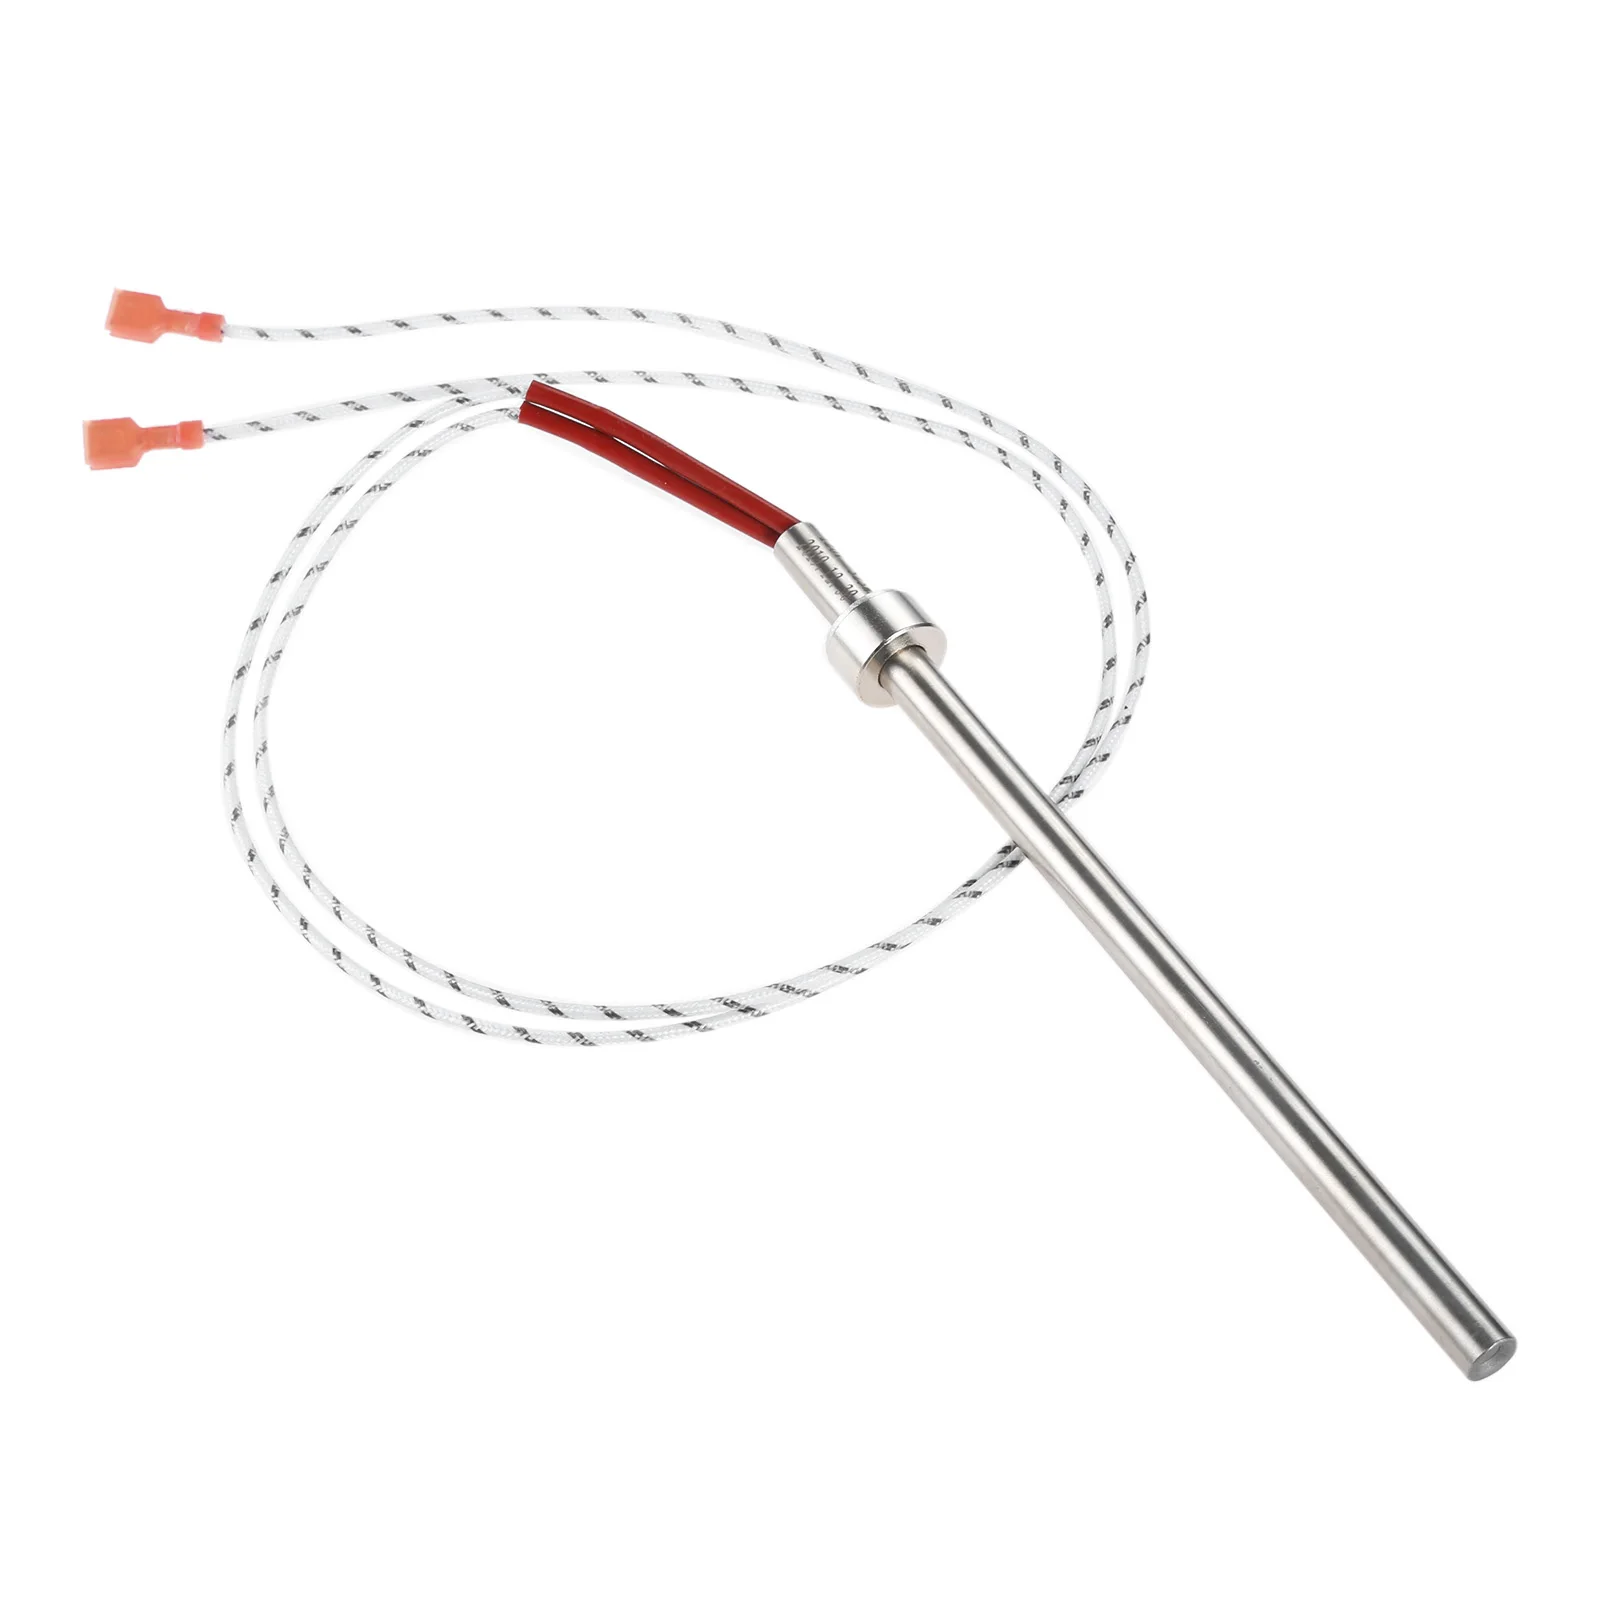 PU-CH6 - England Englander Pellet Stove Igniter Ignitor for 